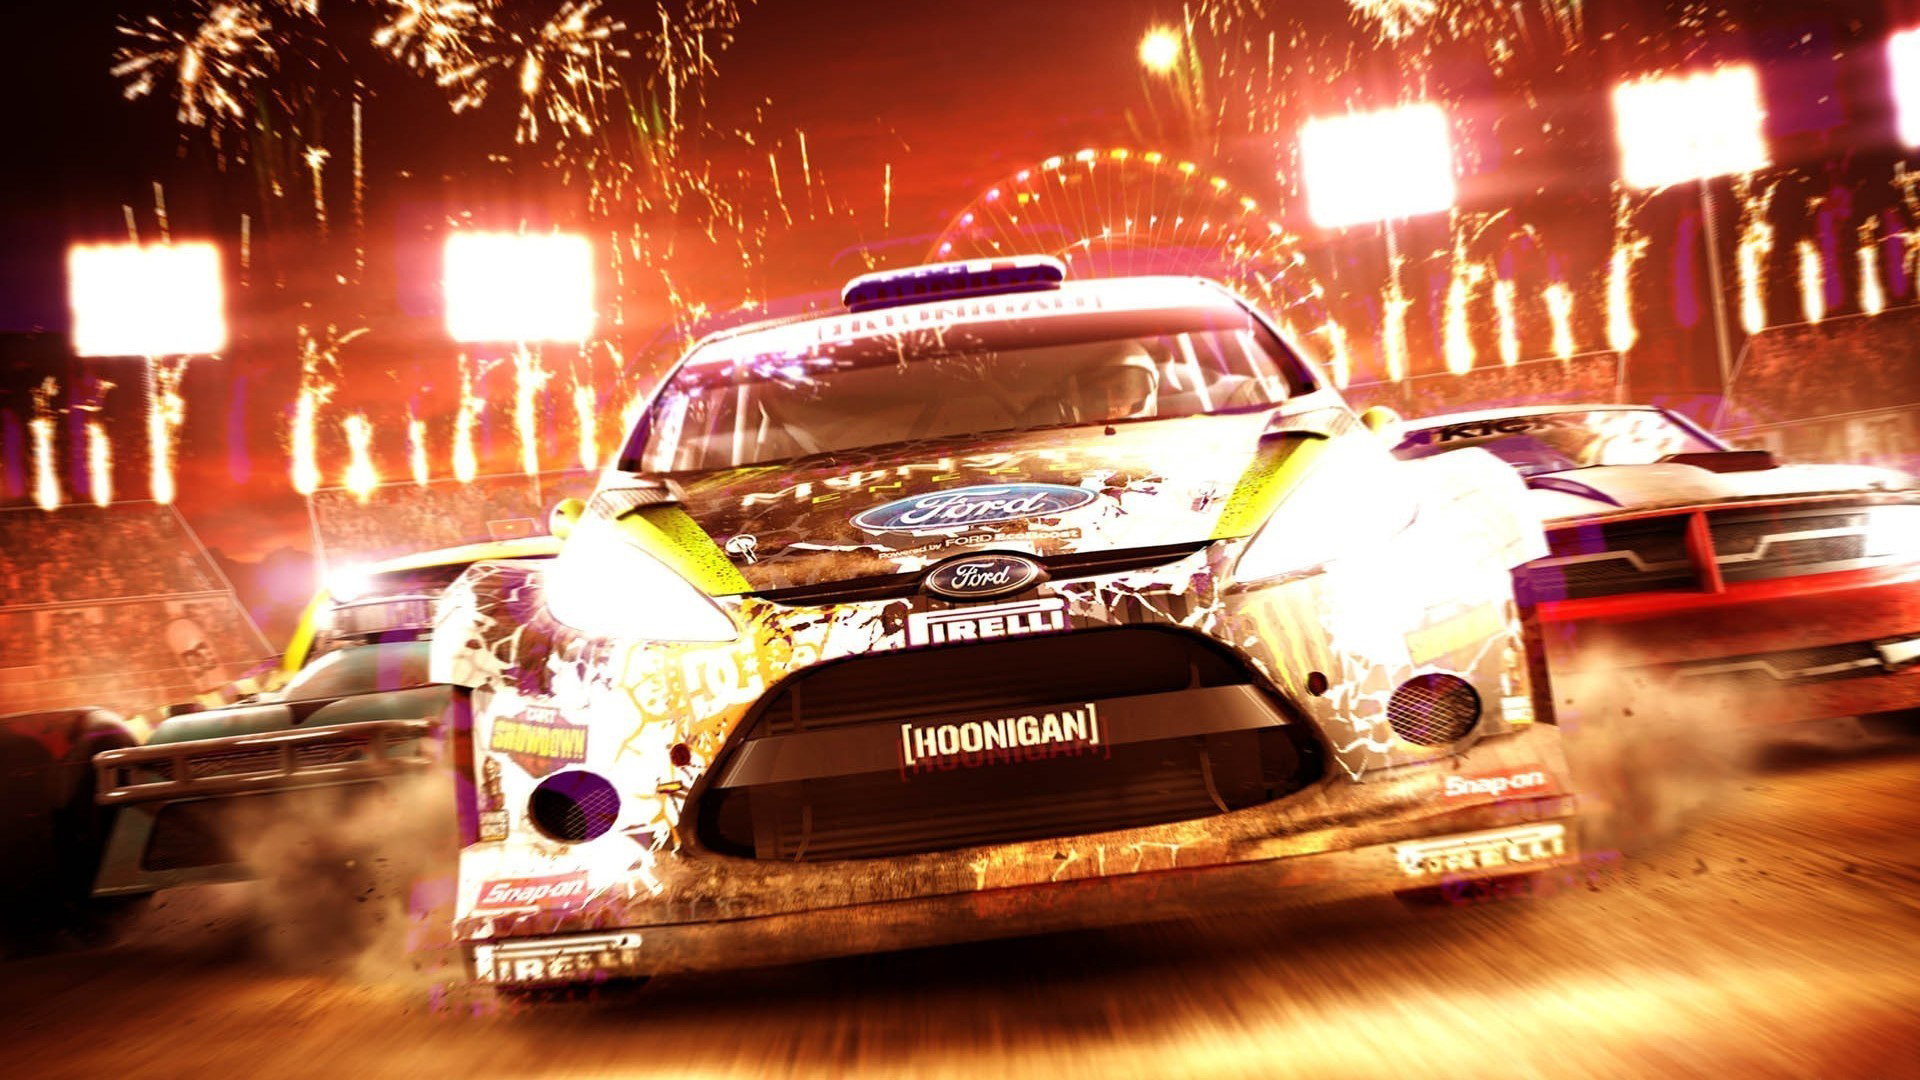 DiRT 3 Full HD Wallpaper and Background Image | 1920x1080 | ID:319590